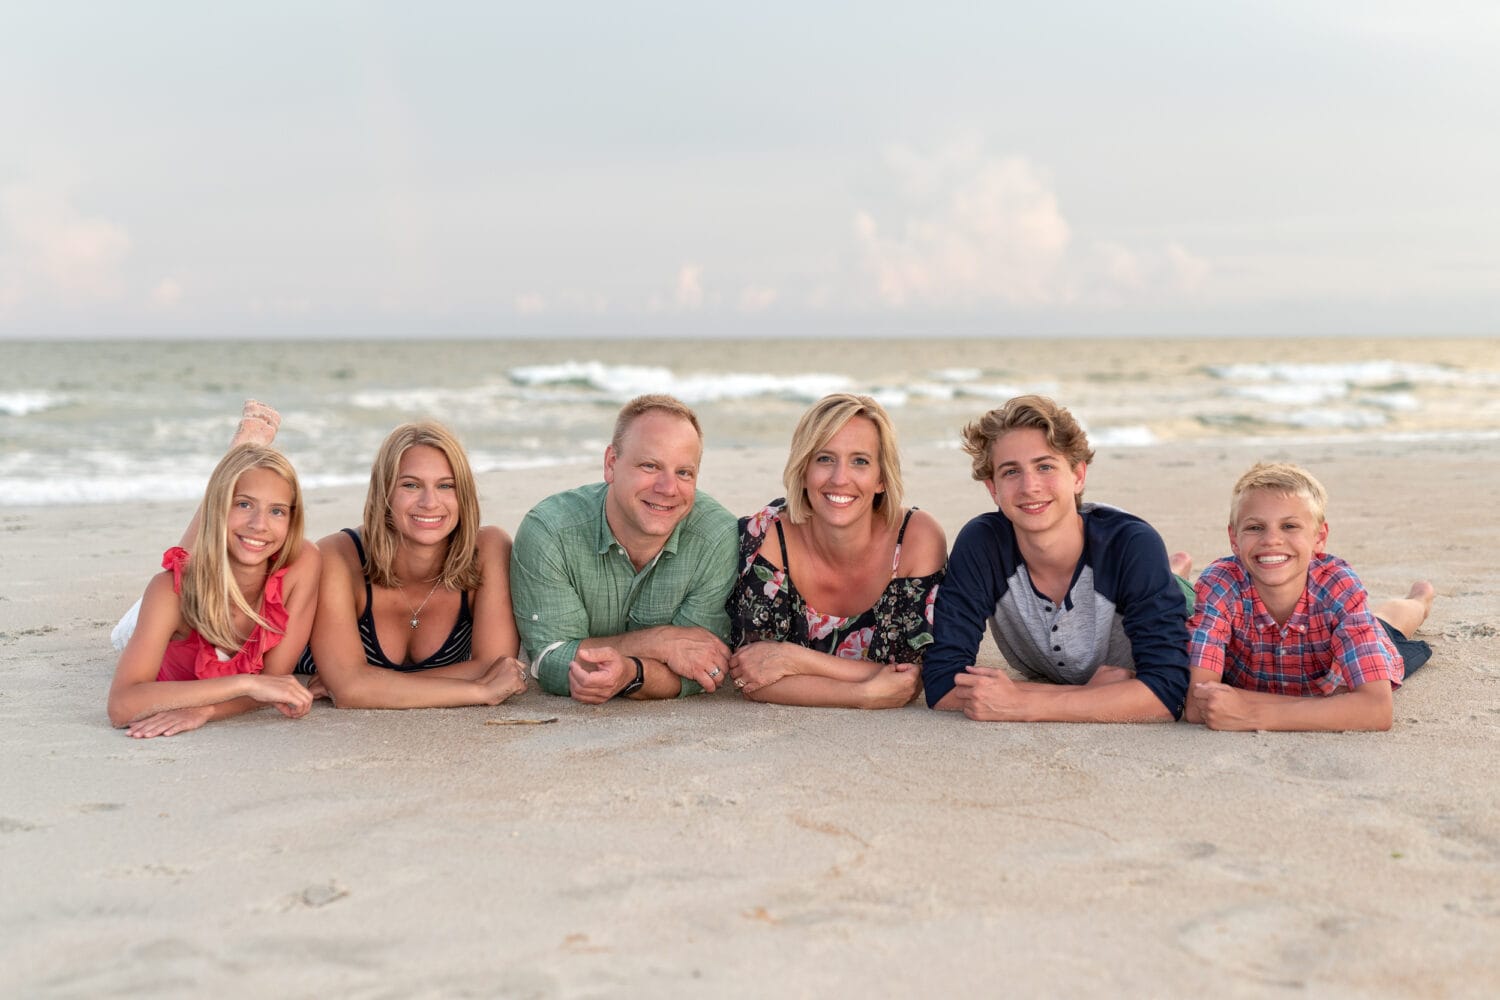 Happy family of 6 laying in the sand together - Huntington Beach State Park